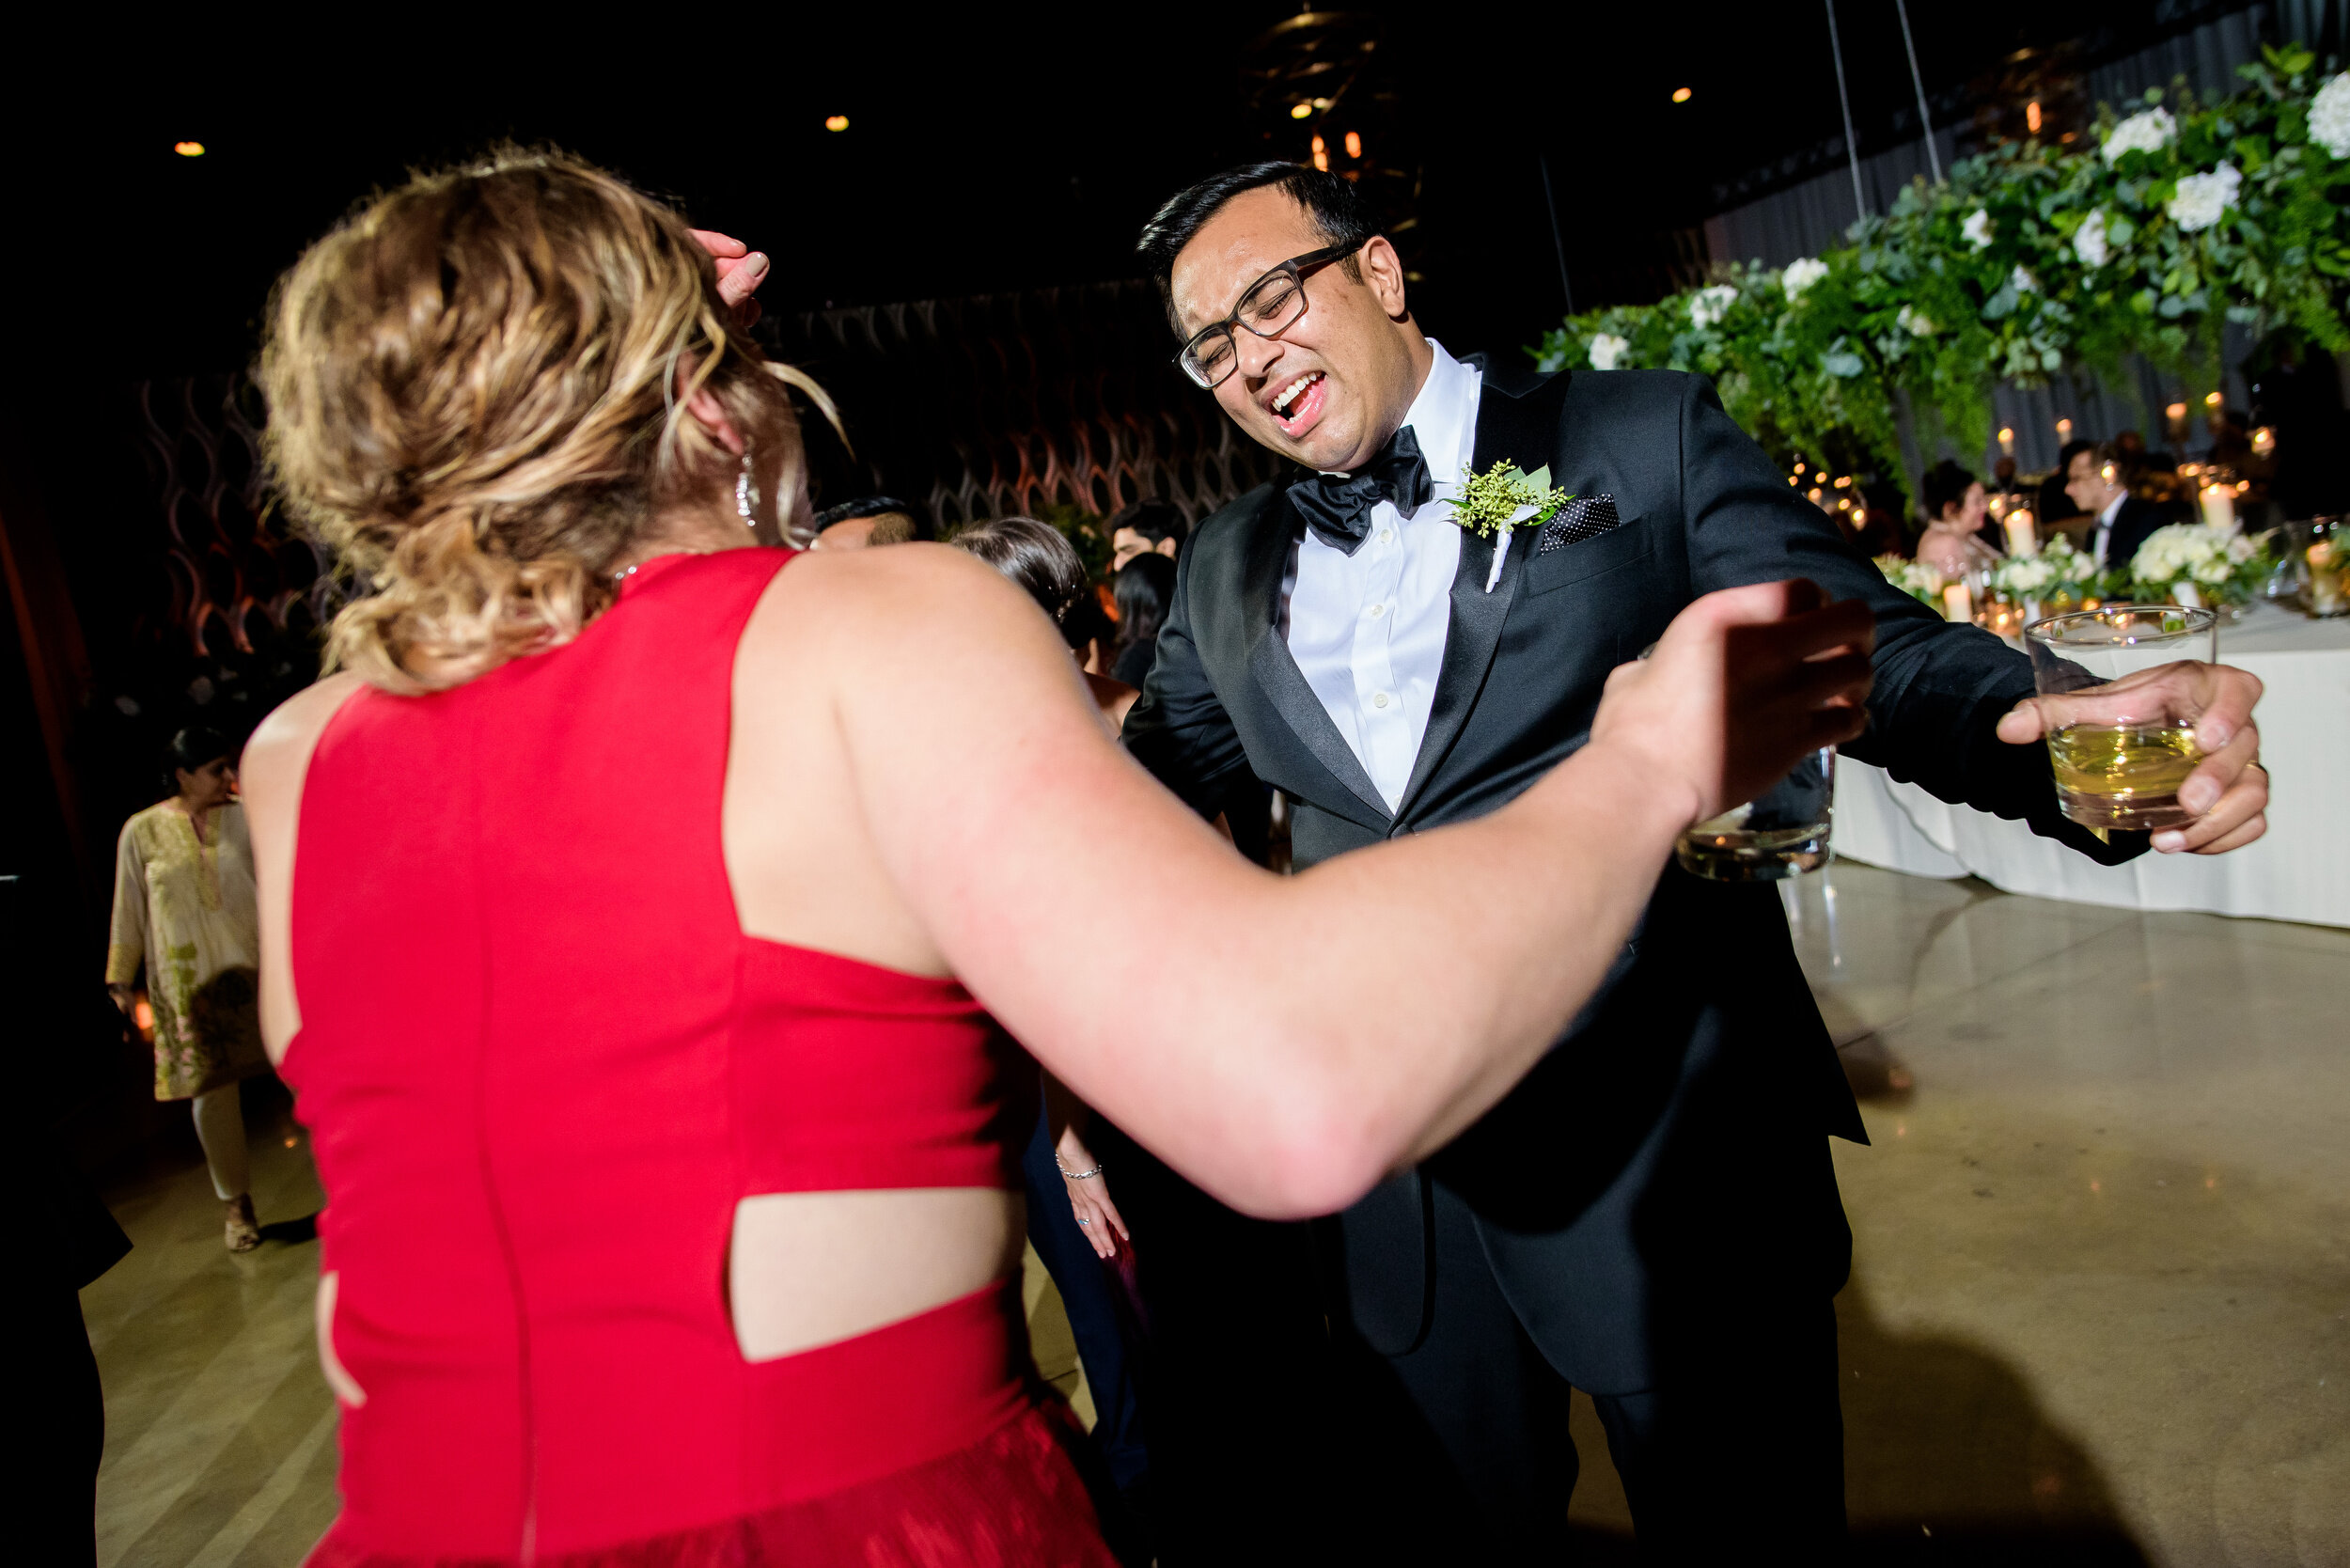 Groom on the dance floor during his wedding reception: Geraghty Chicago wedding photography by J. Brown Photography.